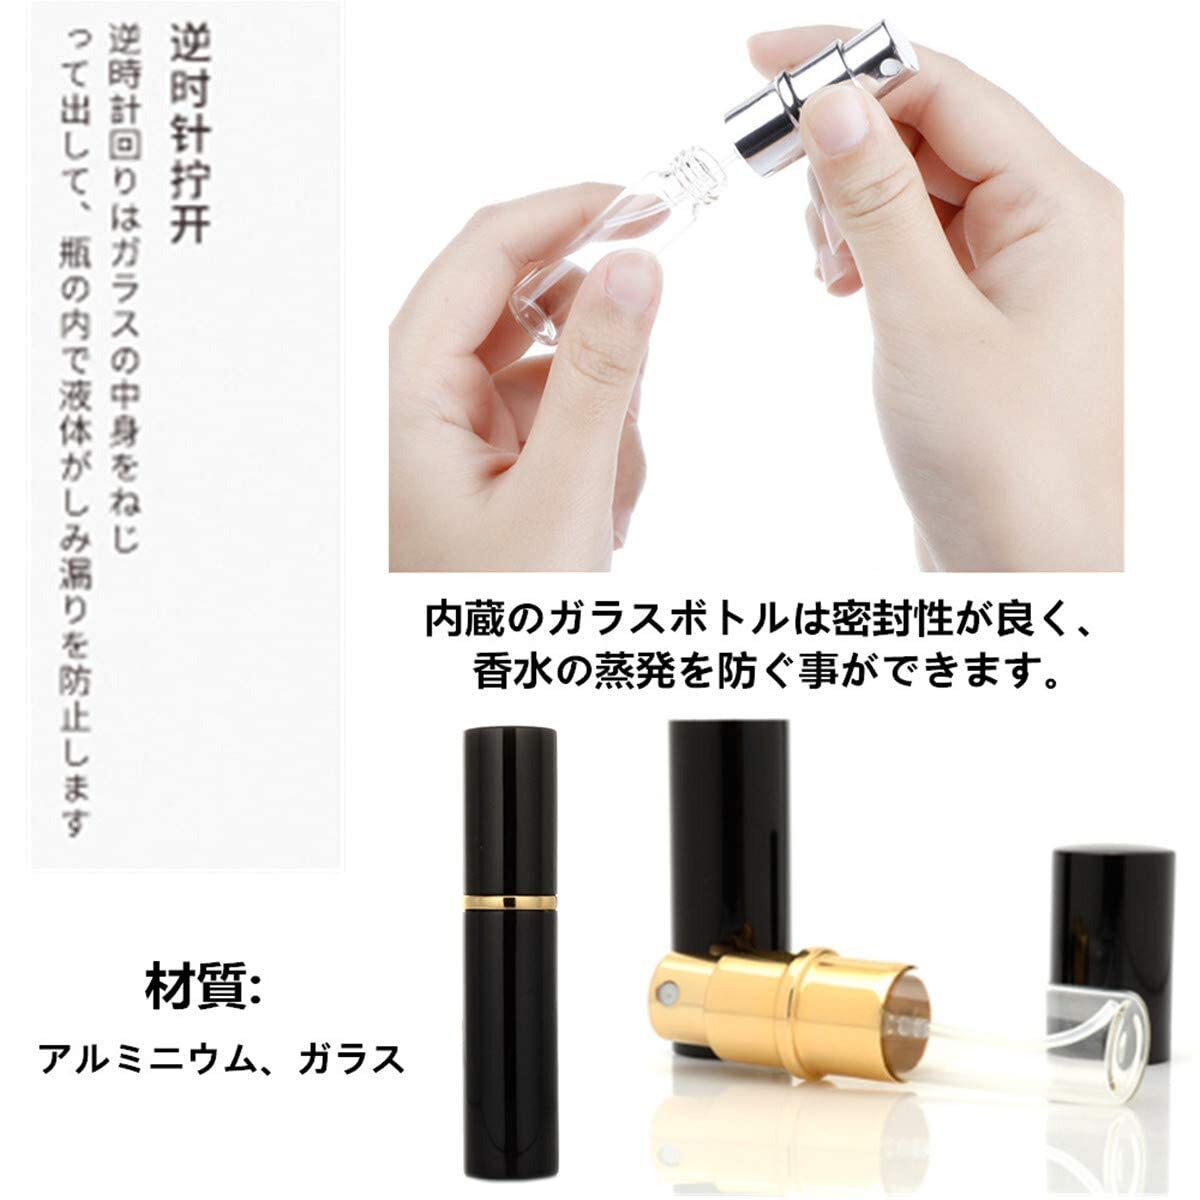 [ special price sale ] refilling container perfume for portable men's perfume sprayer for women Quick 5ml portable 2 color set refilling spo i